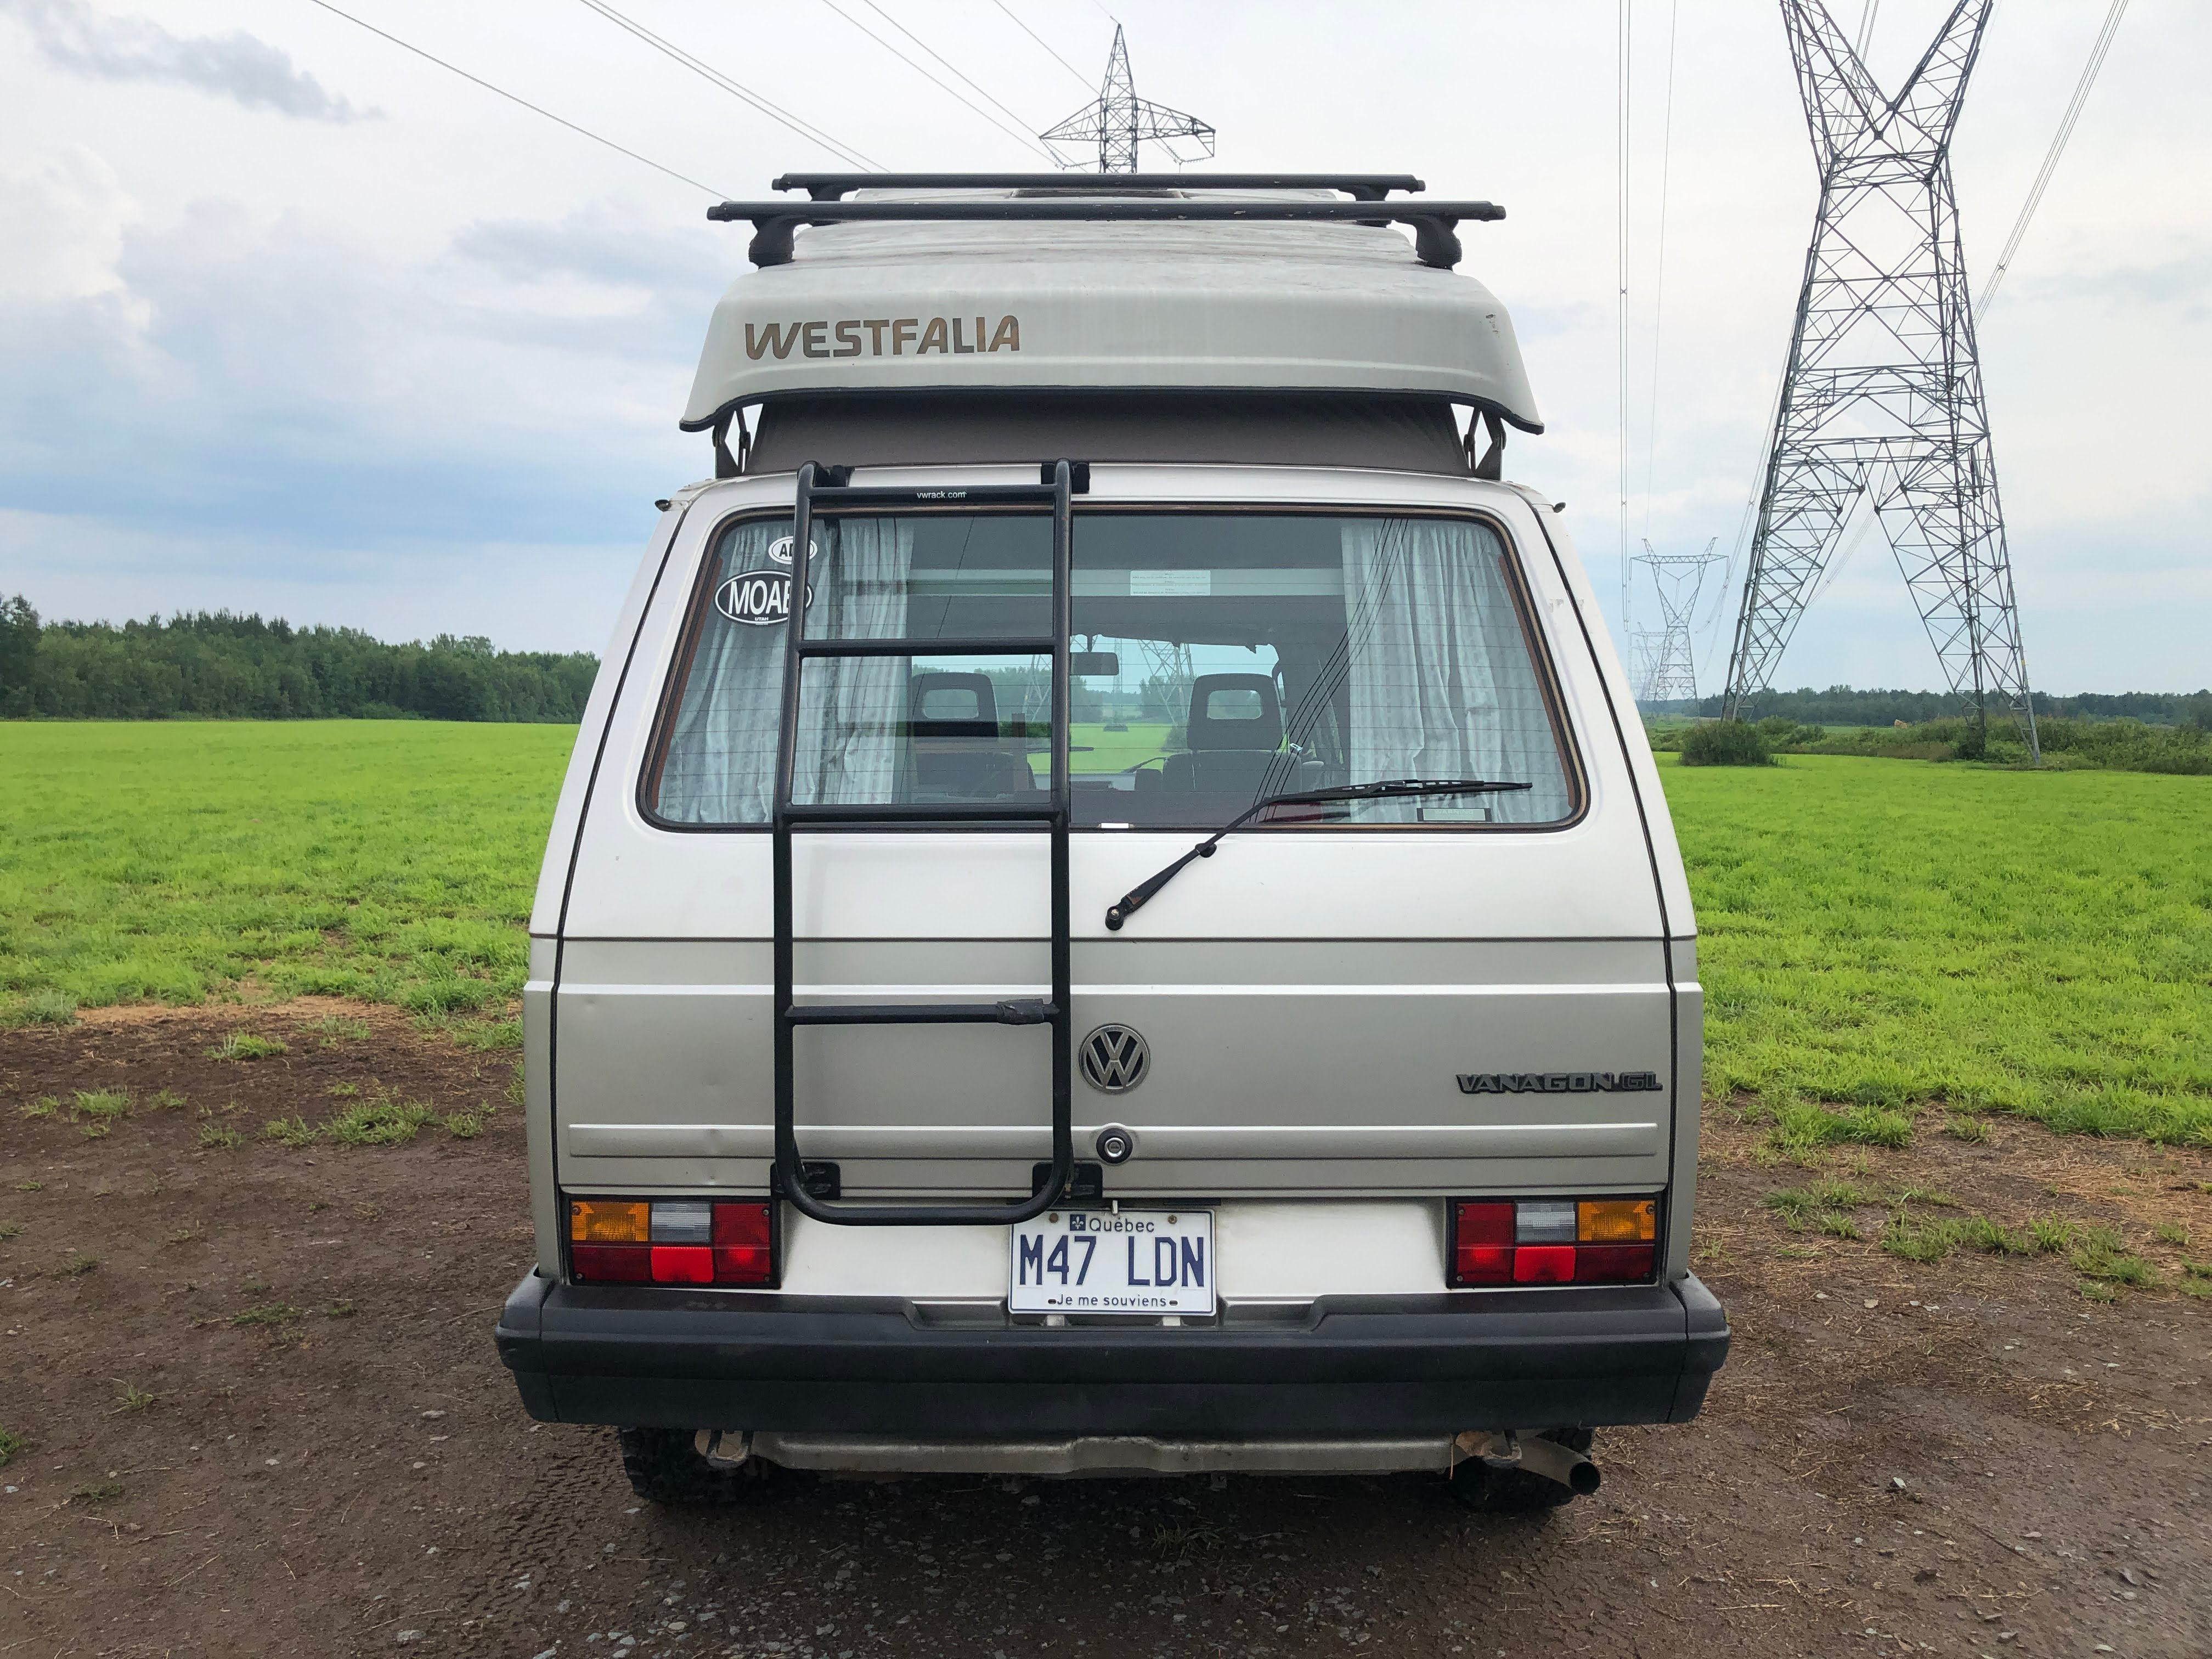 The rear end of a 1990 Volkswagen Vanagon Westfalia. We spoke with someone who owns the camper van to get some insight into buying one.